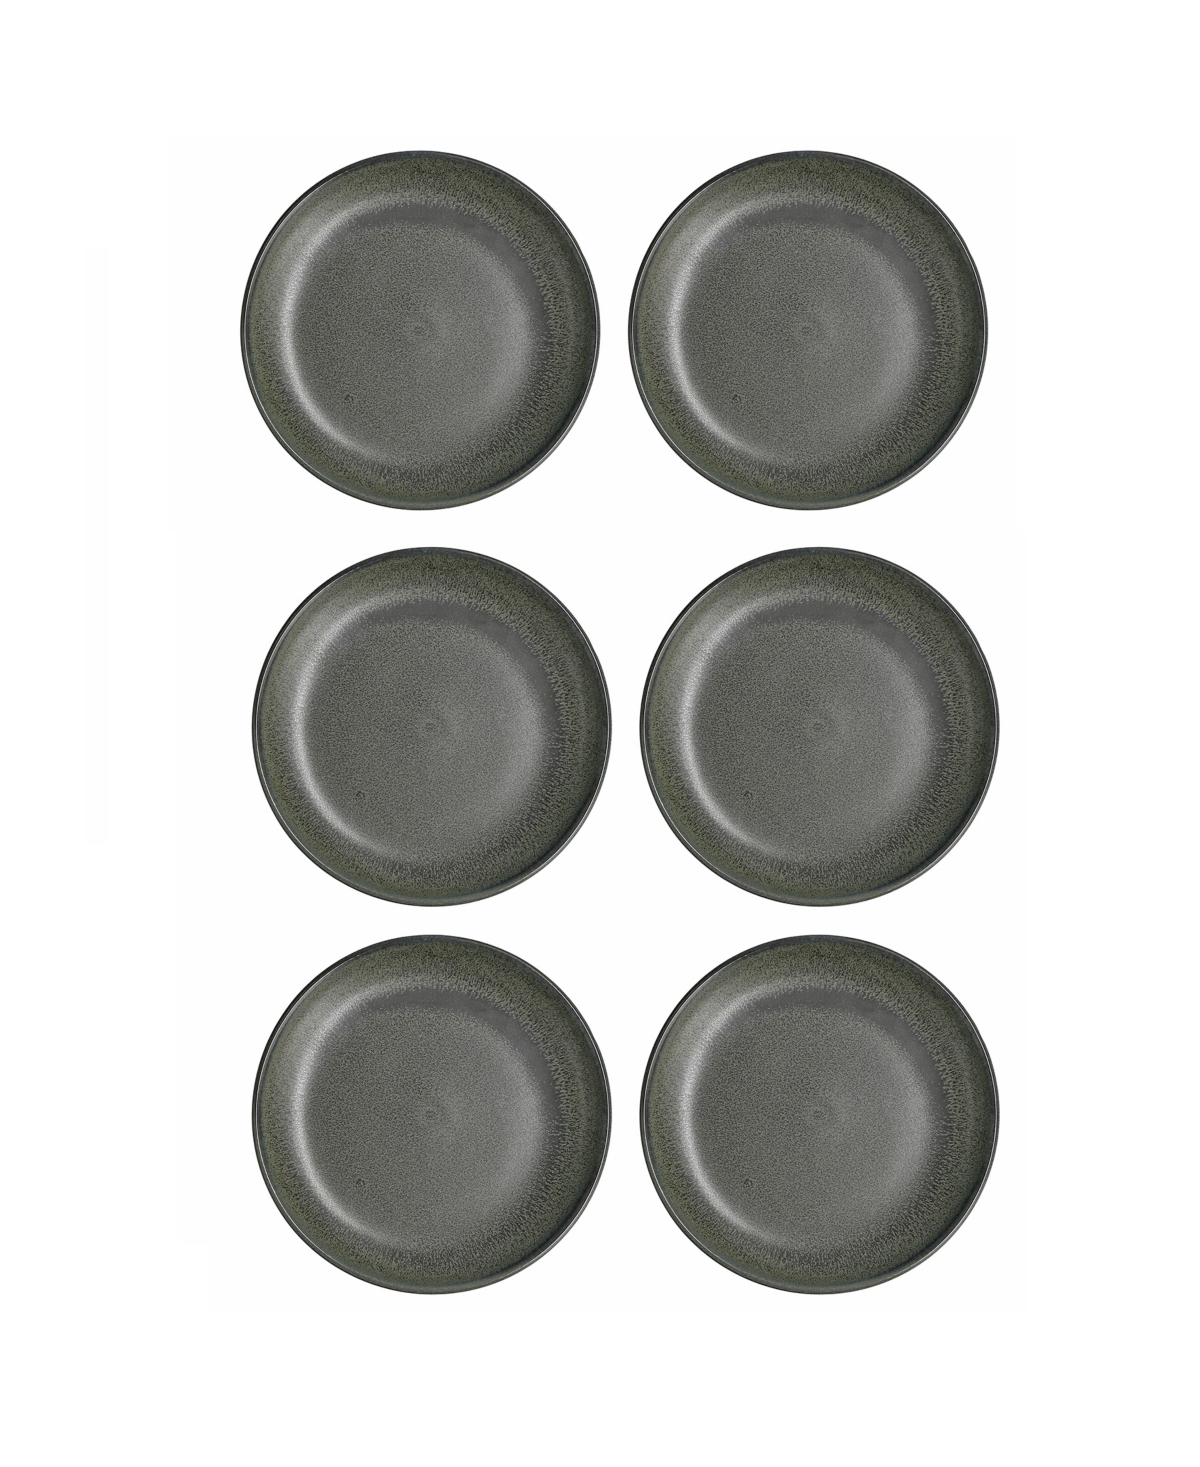 Sound Forest Coupe 6" 6 Piece Bead & Butter Plate Set, Service for 6 - Forest